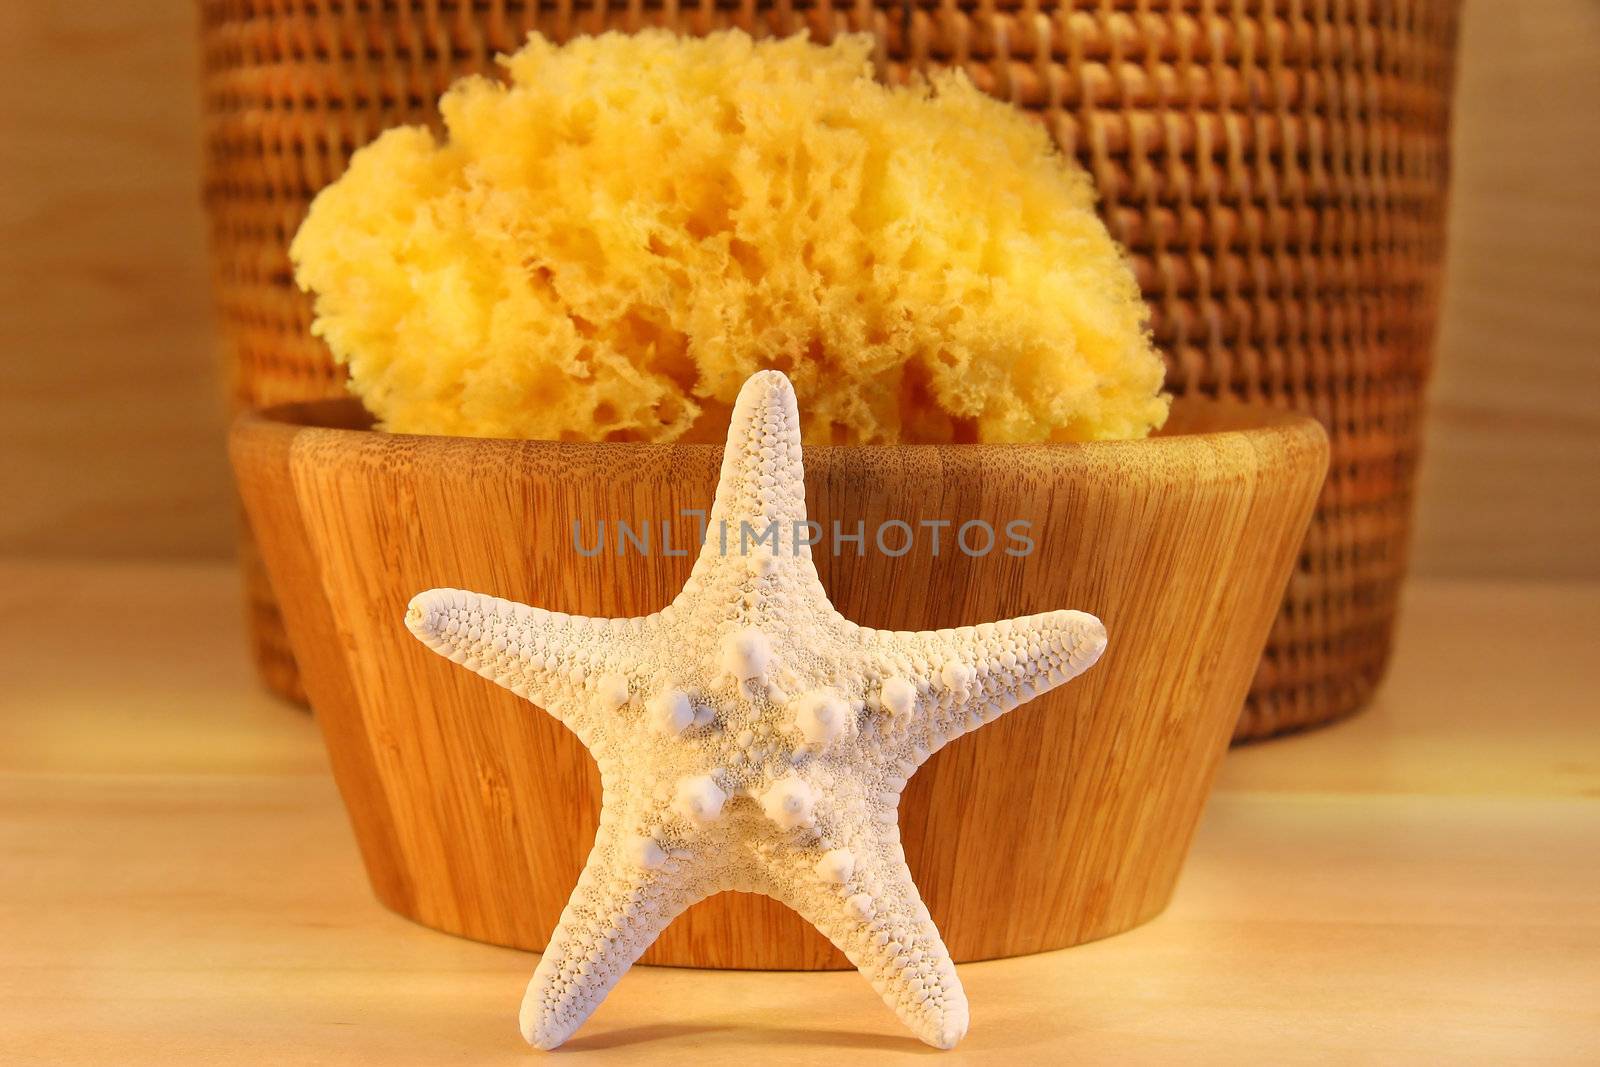 Little white starfish and sponge ready on wooden background